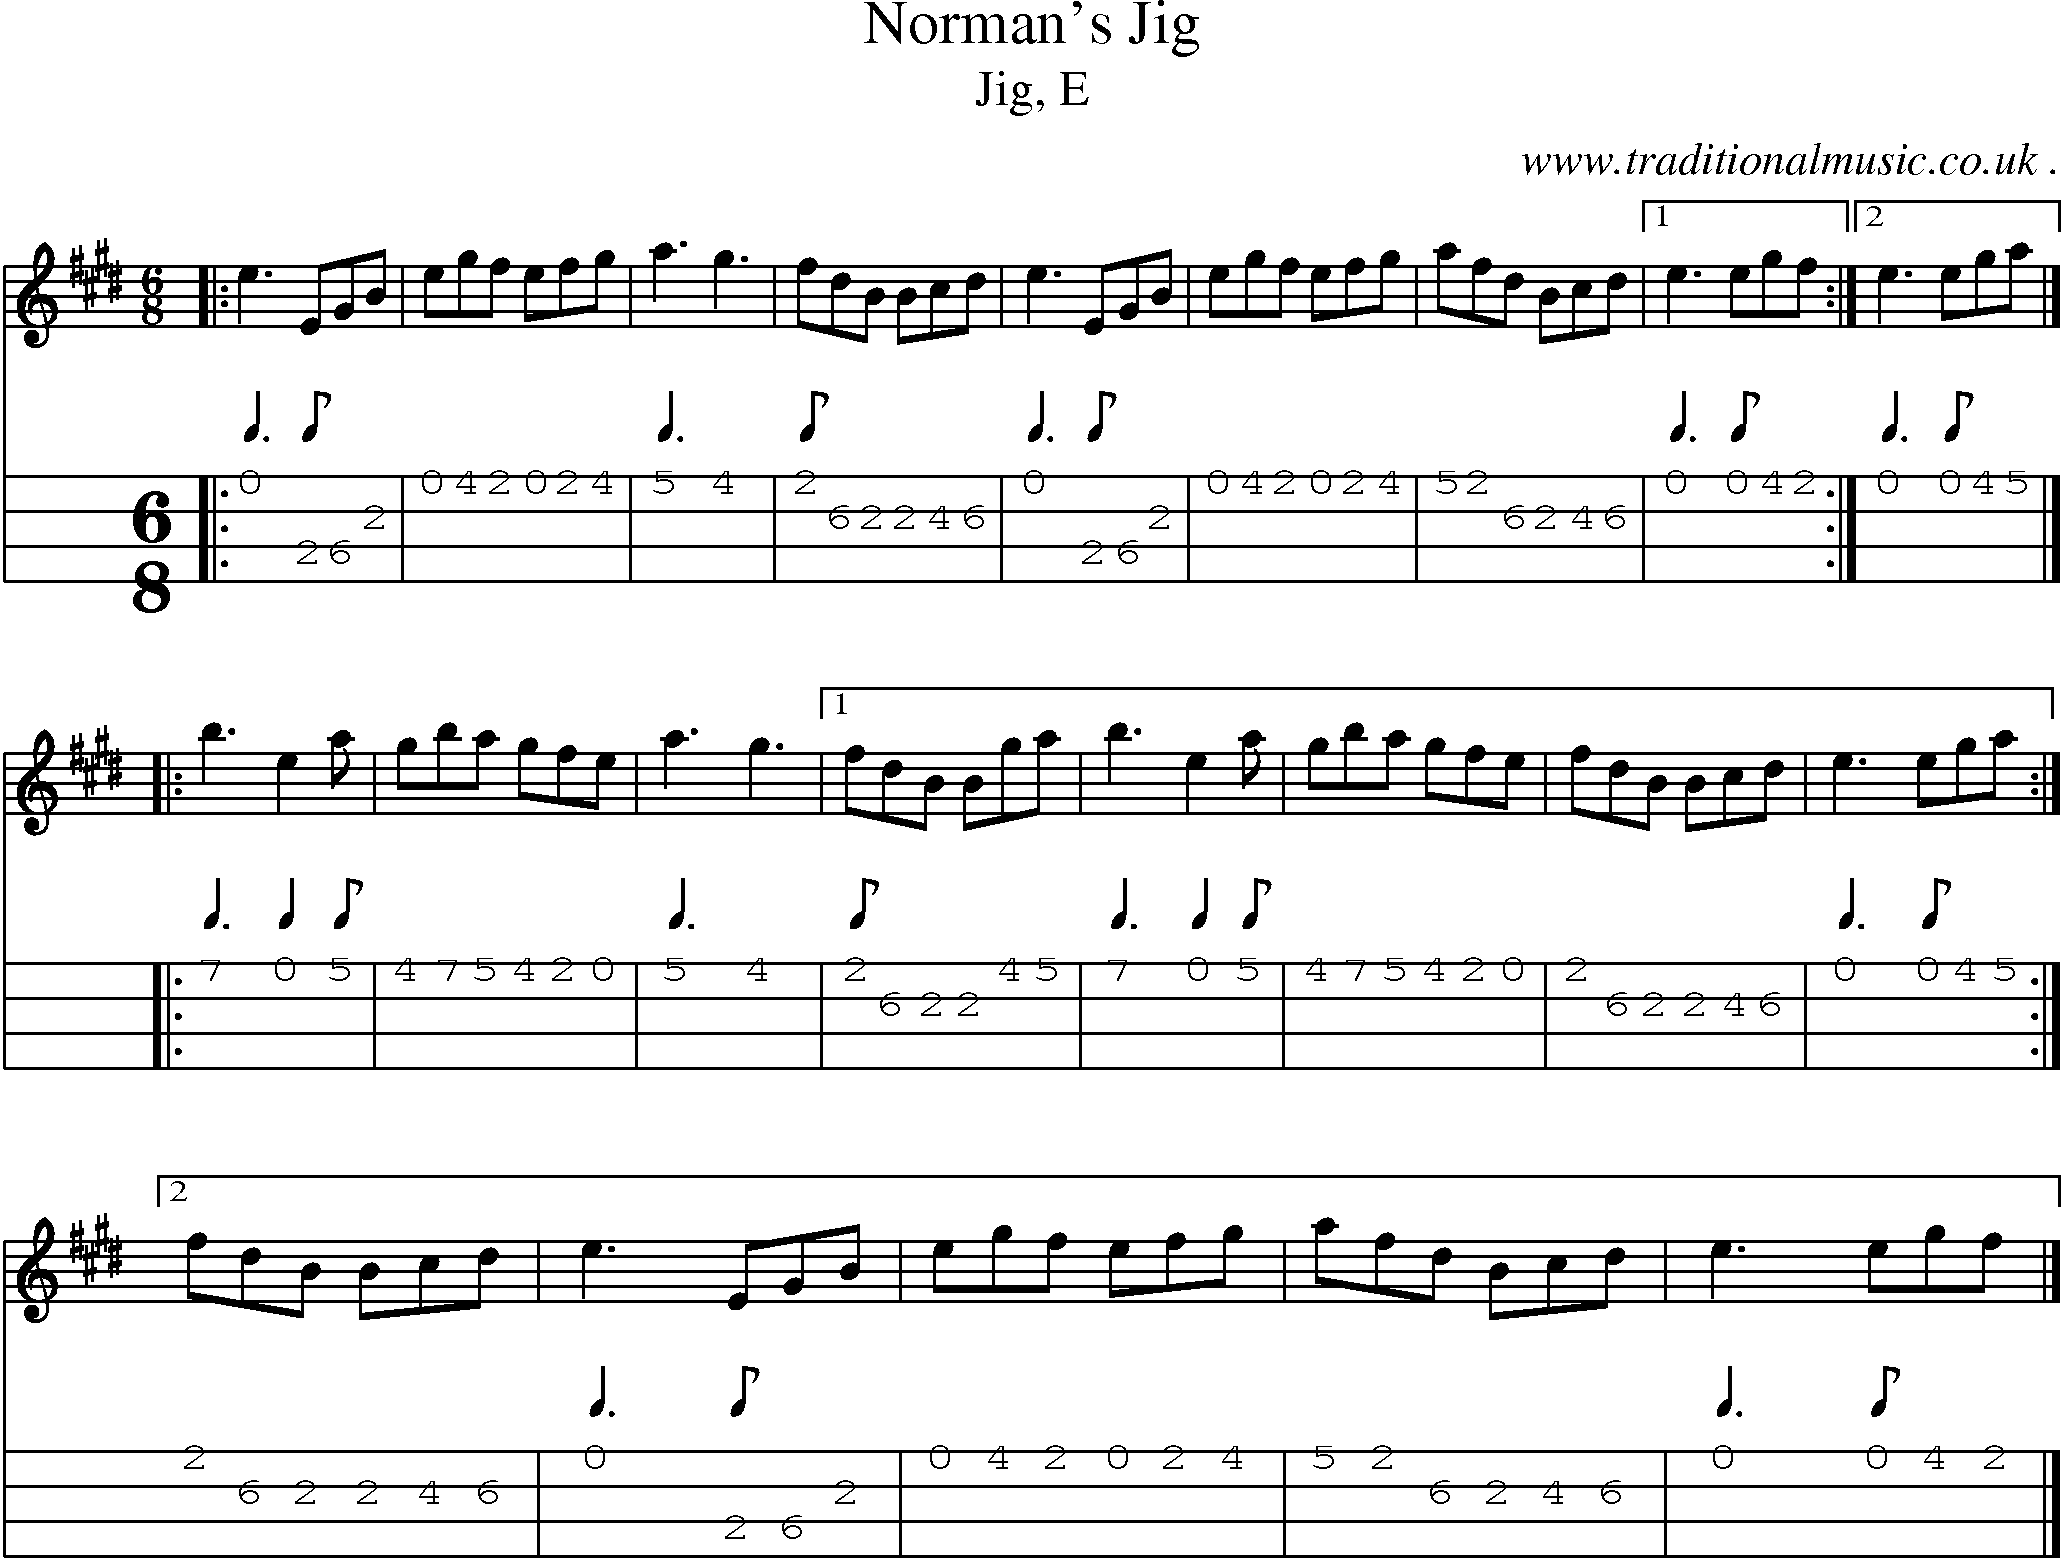 Sheet-music  score, Chords and Mandolin Tabs for Normans Jig